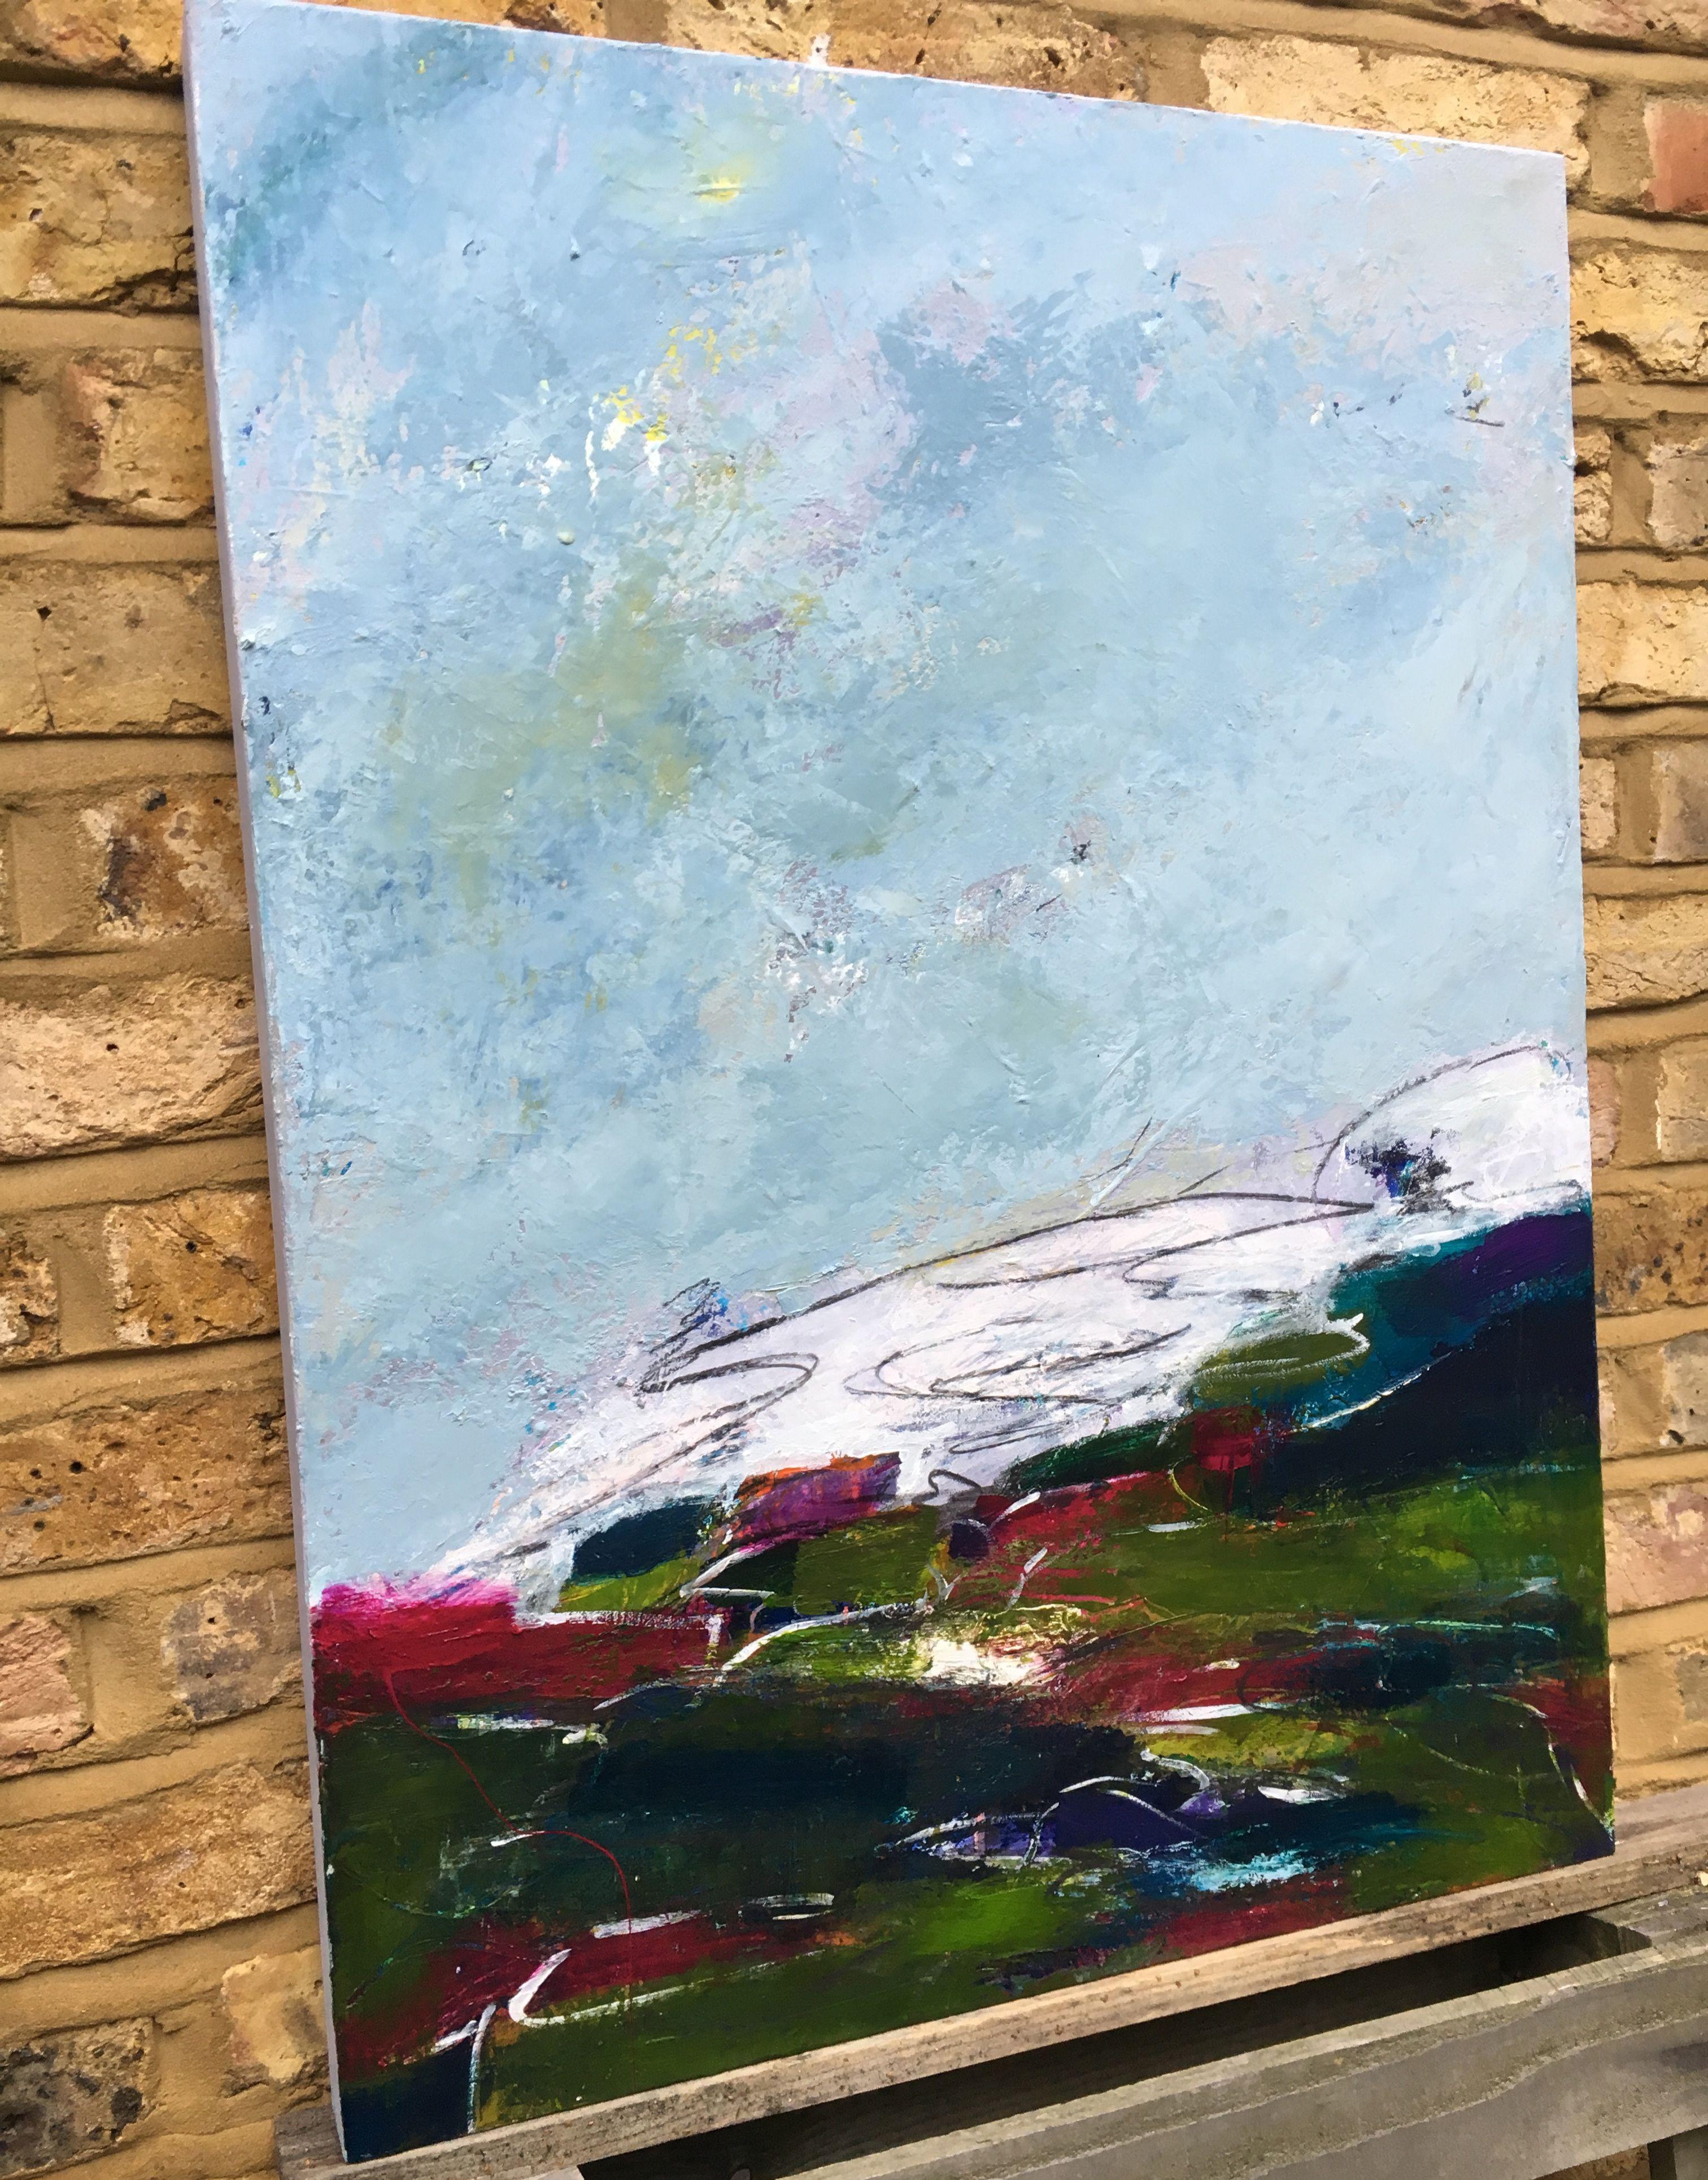 An abstract landscape painting inspired by mood rather than imagery. The painting was built over many colour washes of acrylic glazes with charcoal and pencil lines added.    The box canvas has been painted around the edges in a complementary